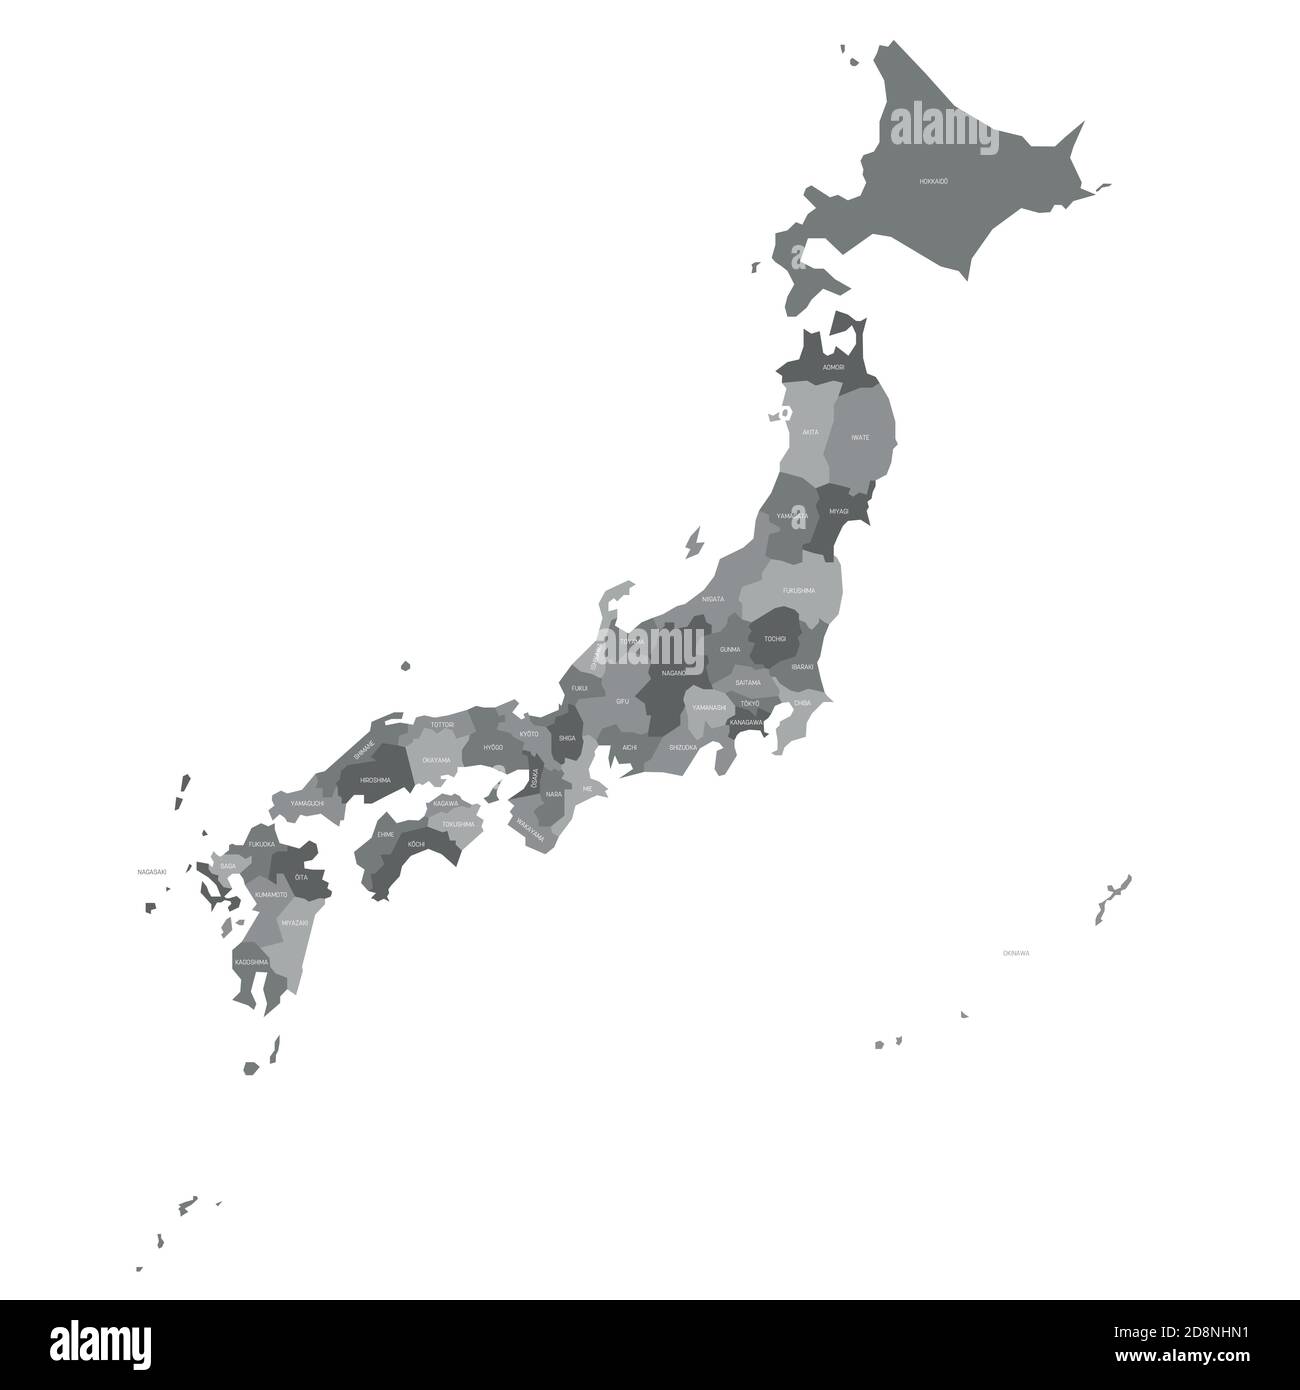 Grey political map of Japan. Administrative divisions - prefectures. Simple flat vector map with labels. Stock Vector